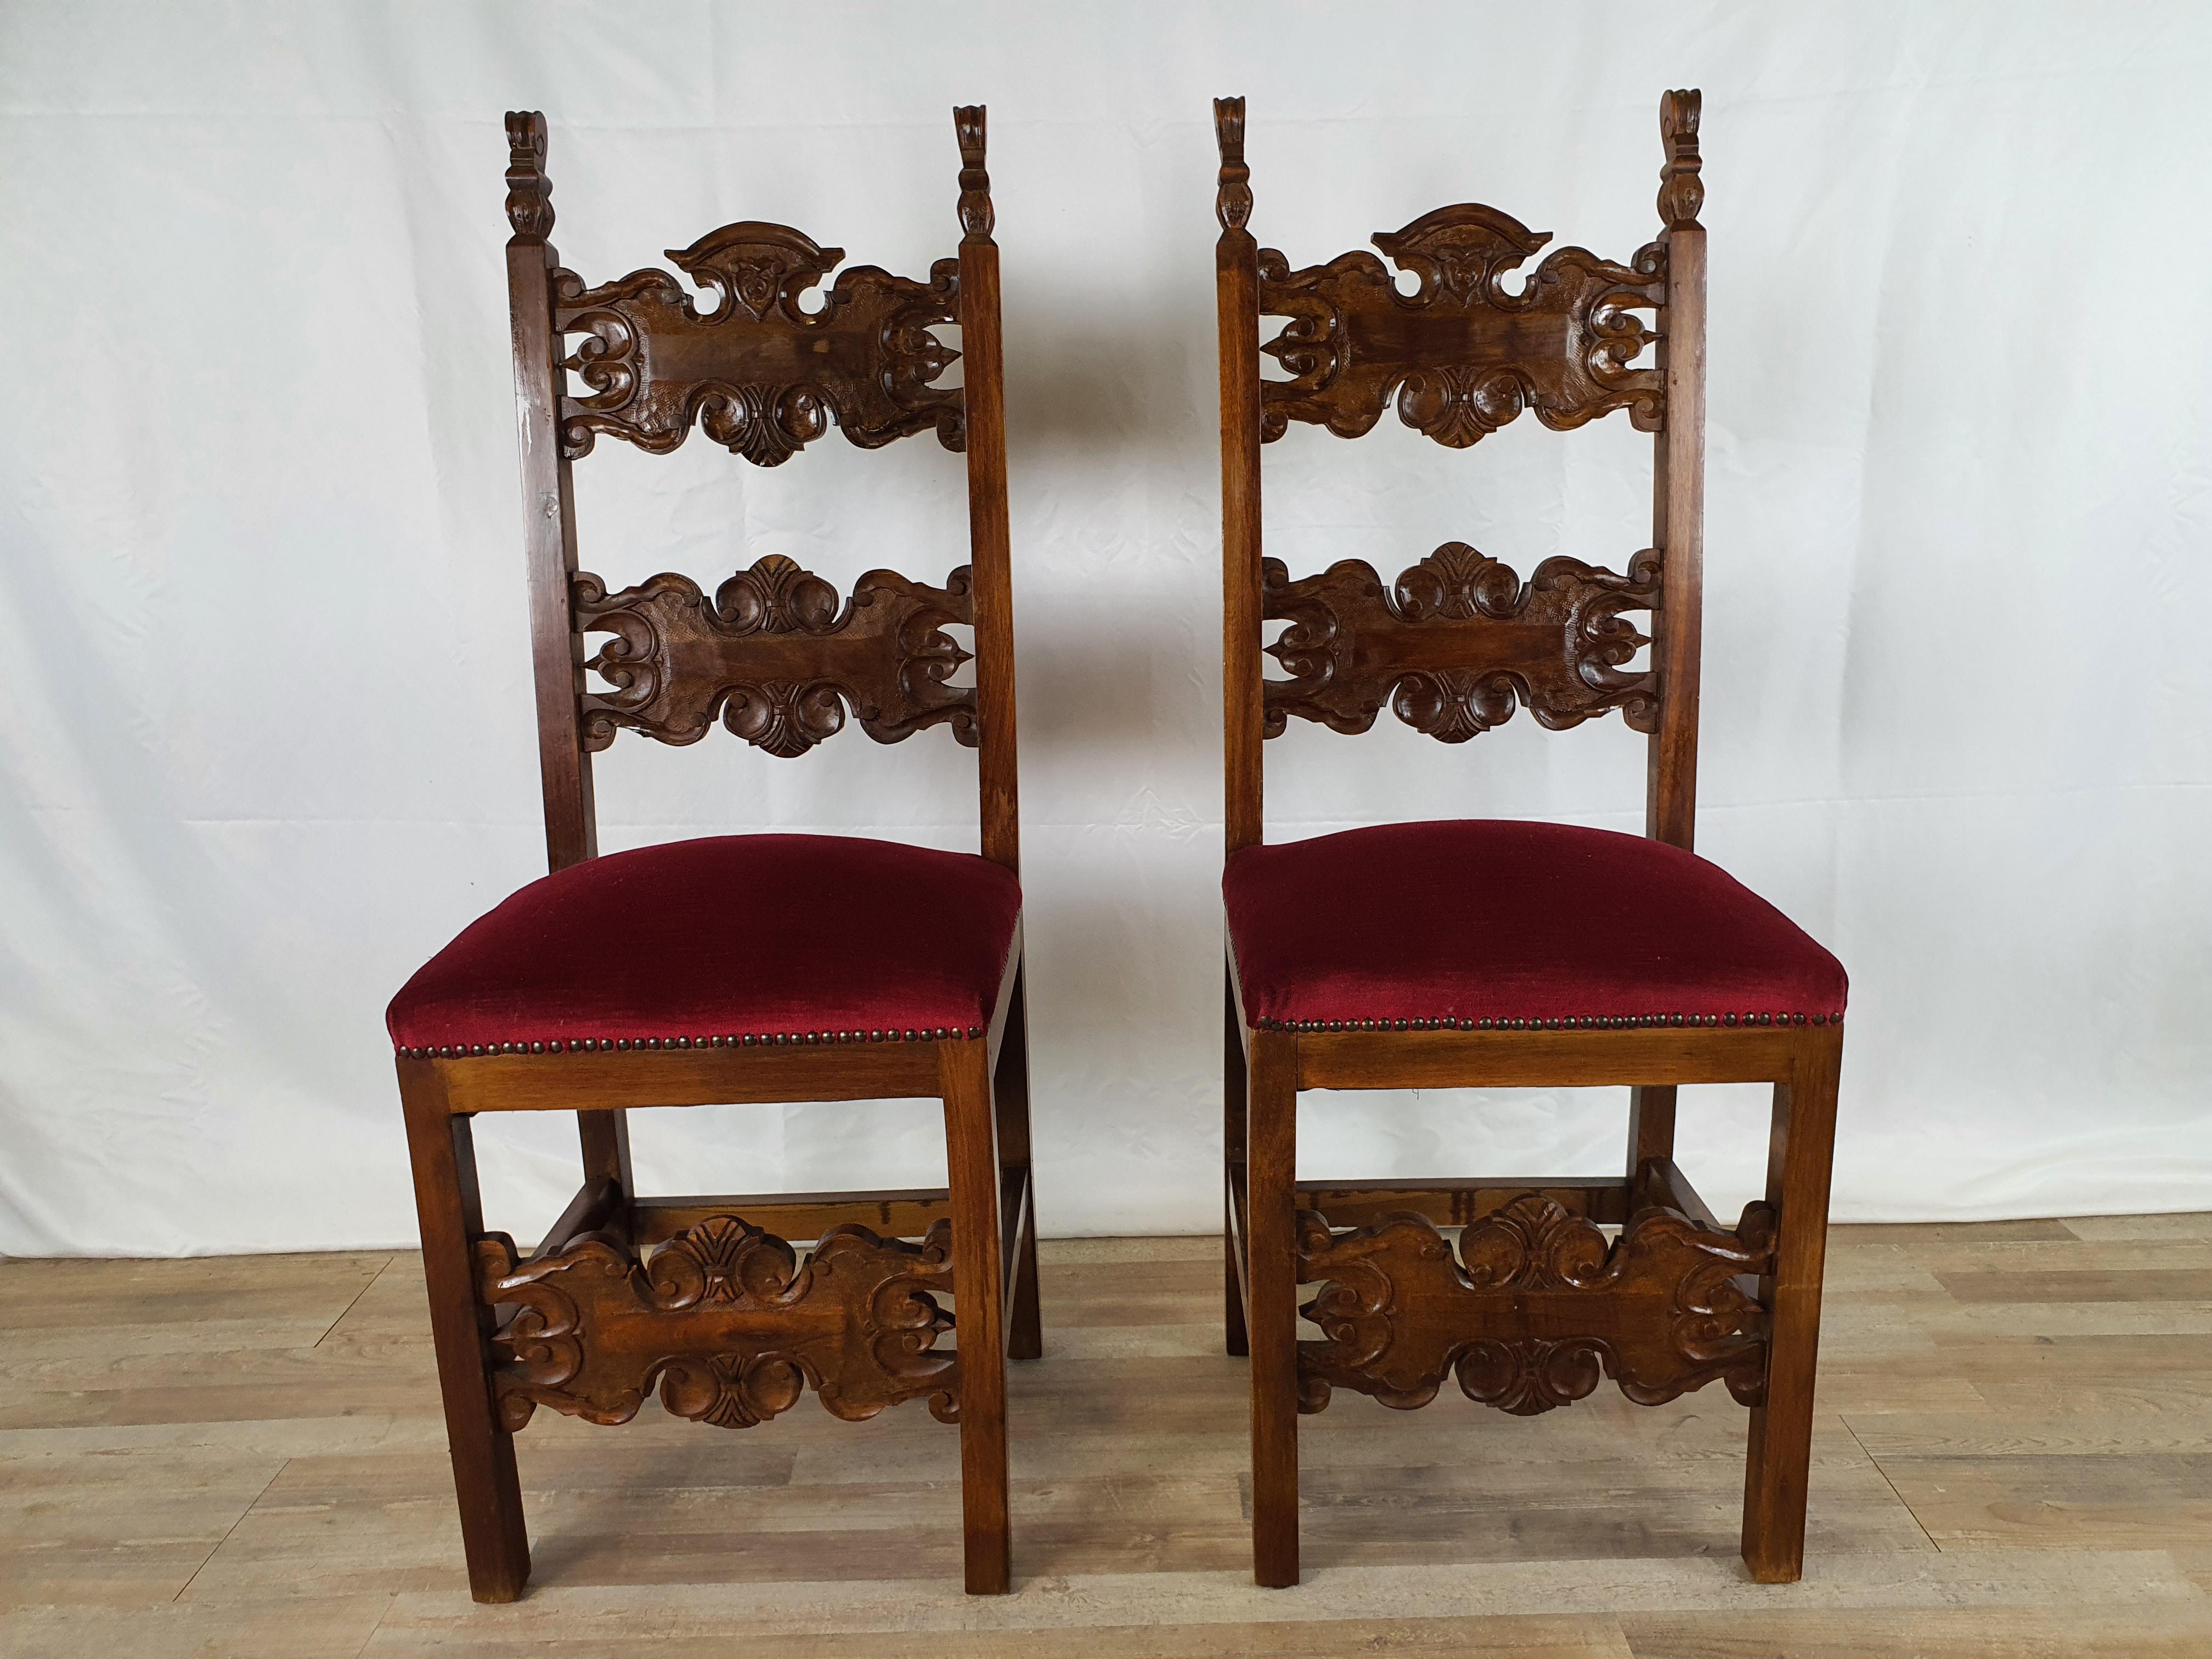 Pair of Renaissance style walnut chairs from the early 1900s, entirely in wood with seat upholstered in red fabric and outlined by small studs.

The chairs lend themselves well to dining rooms or even to be used as furnishing elements to enrich